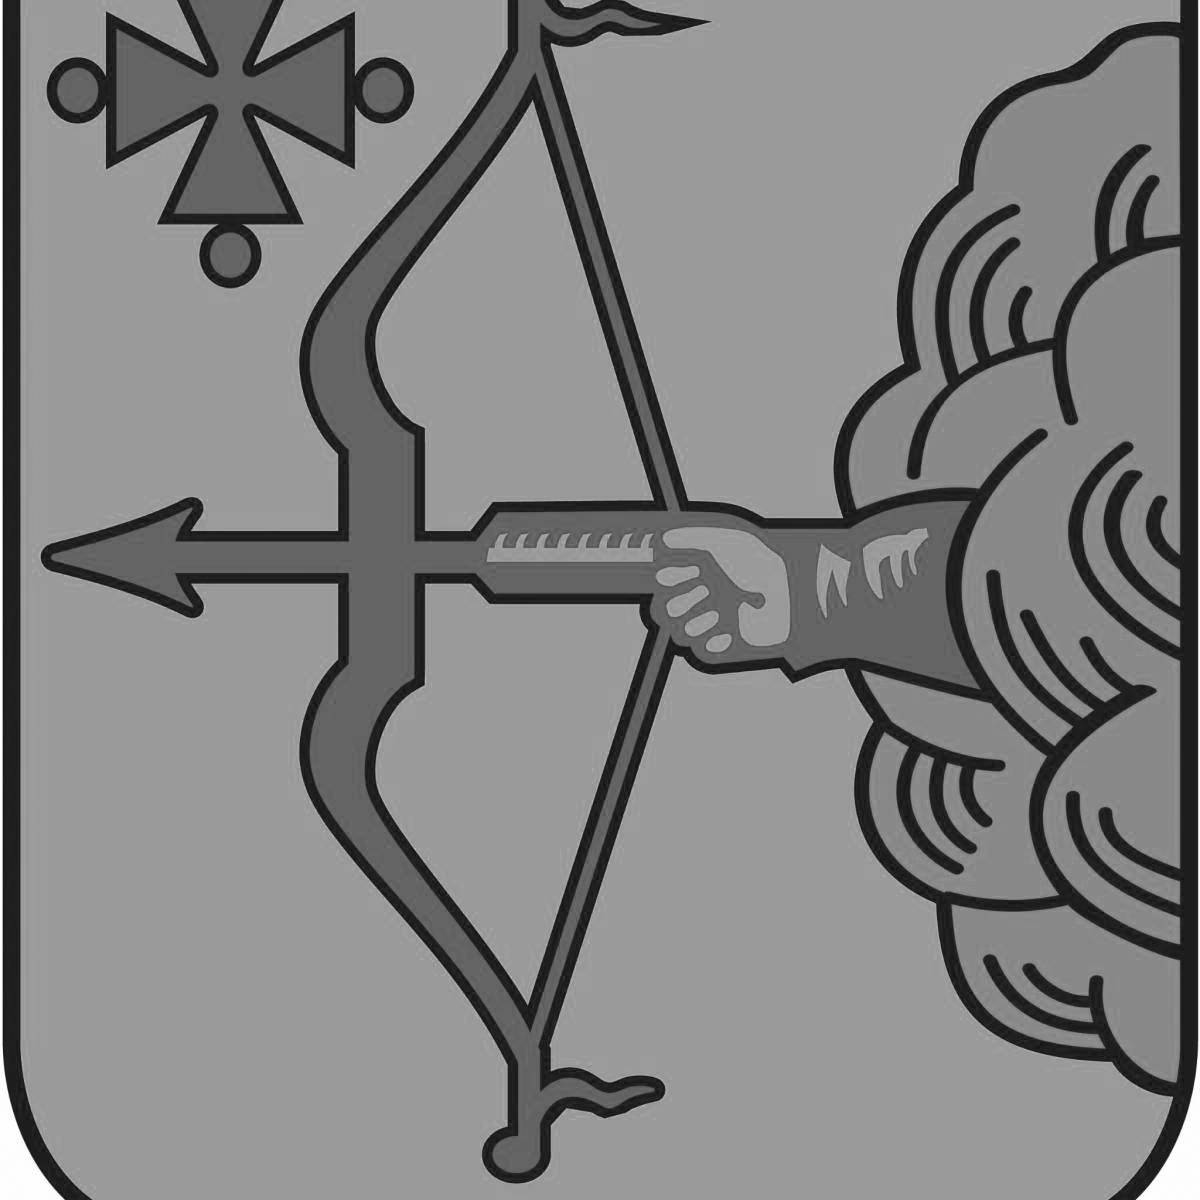 Famous coat of arms of the Kirov region